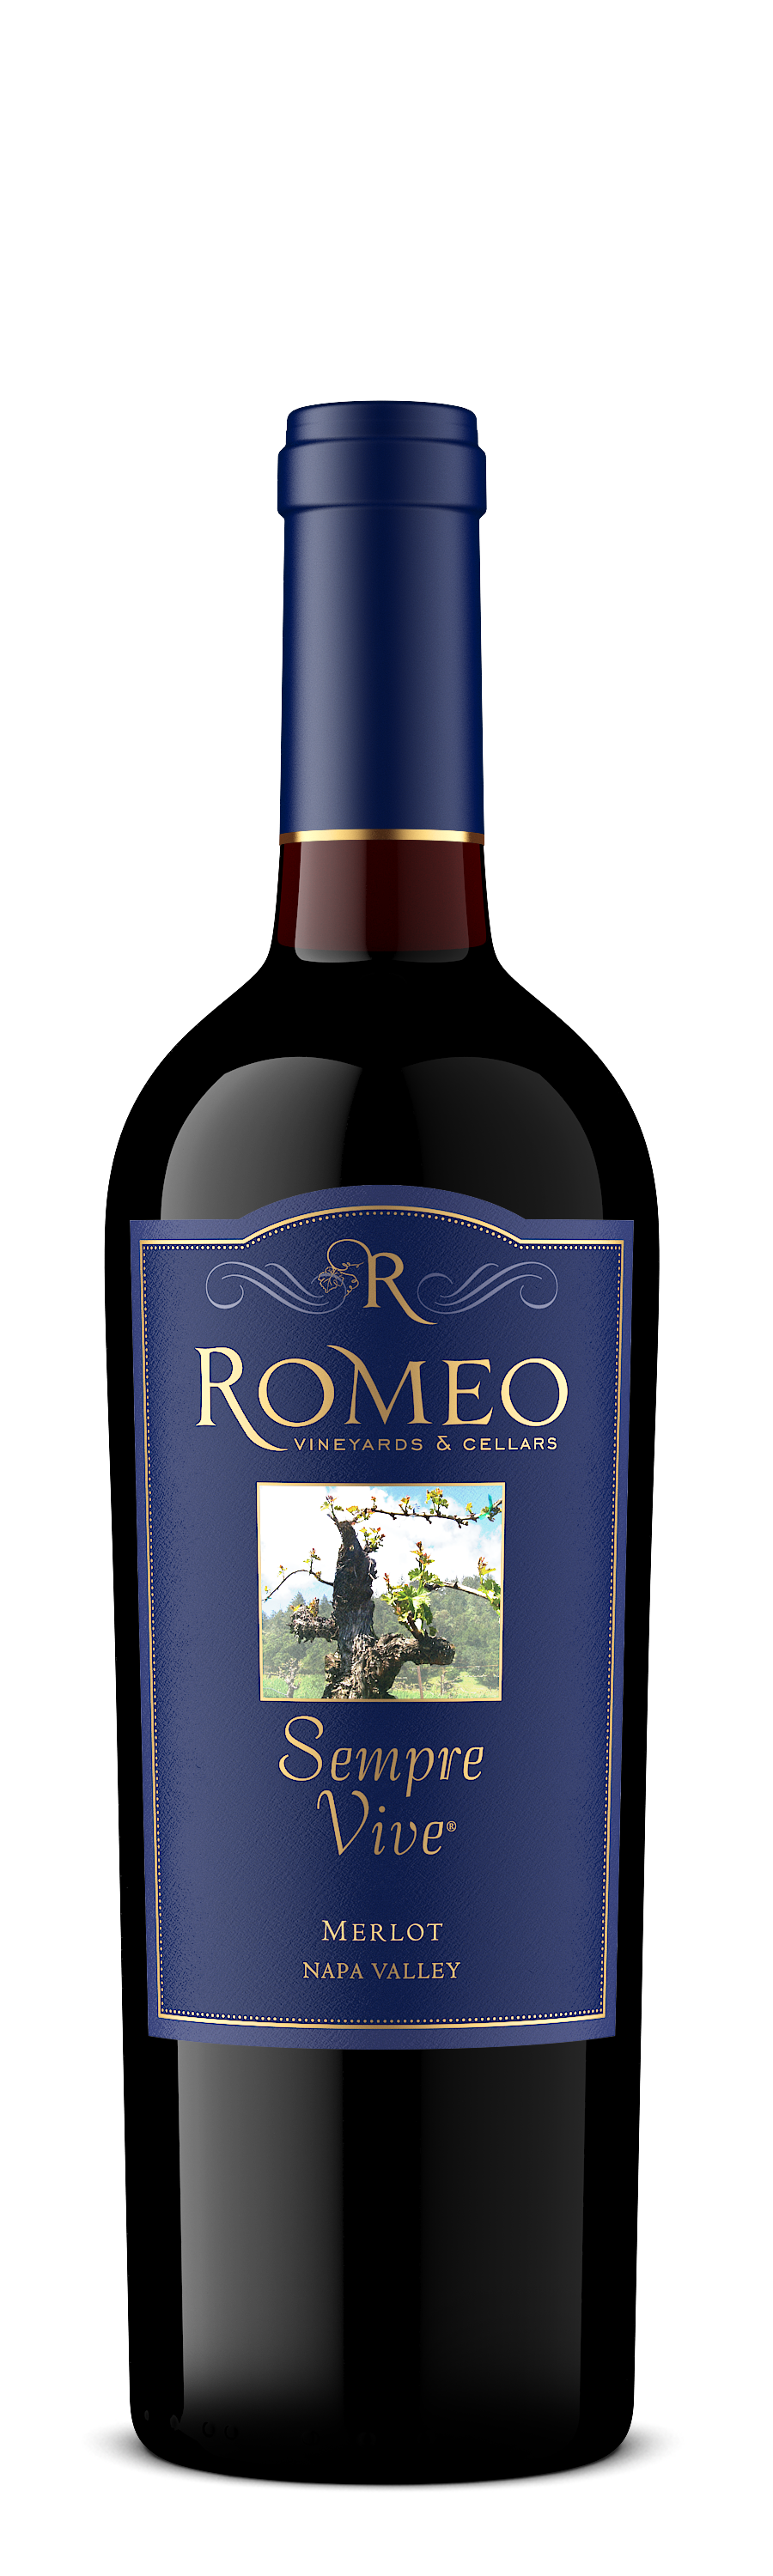 Product Image for 2017 Merlot